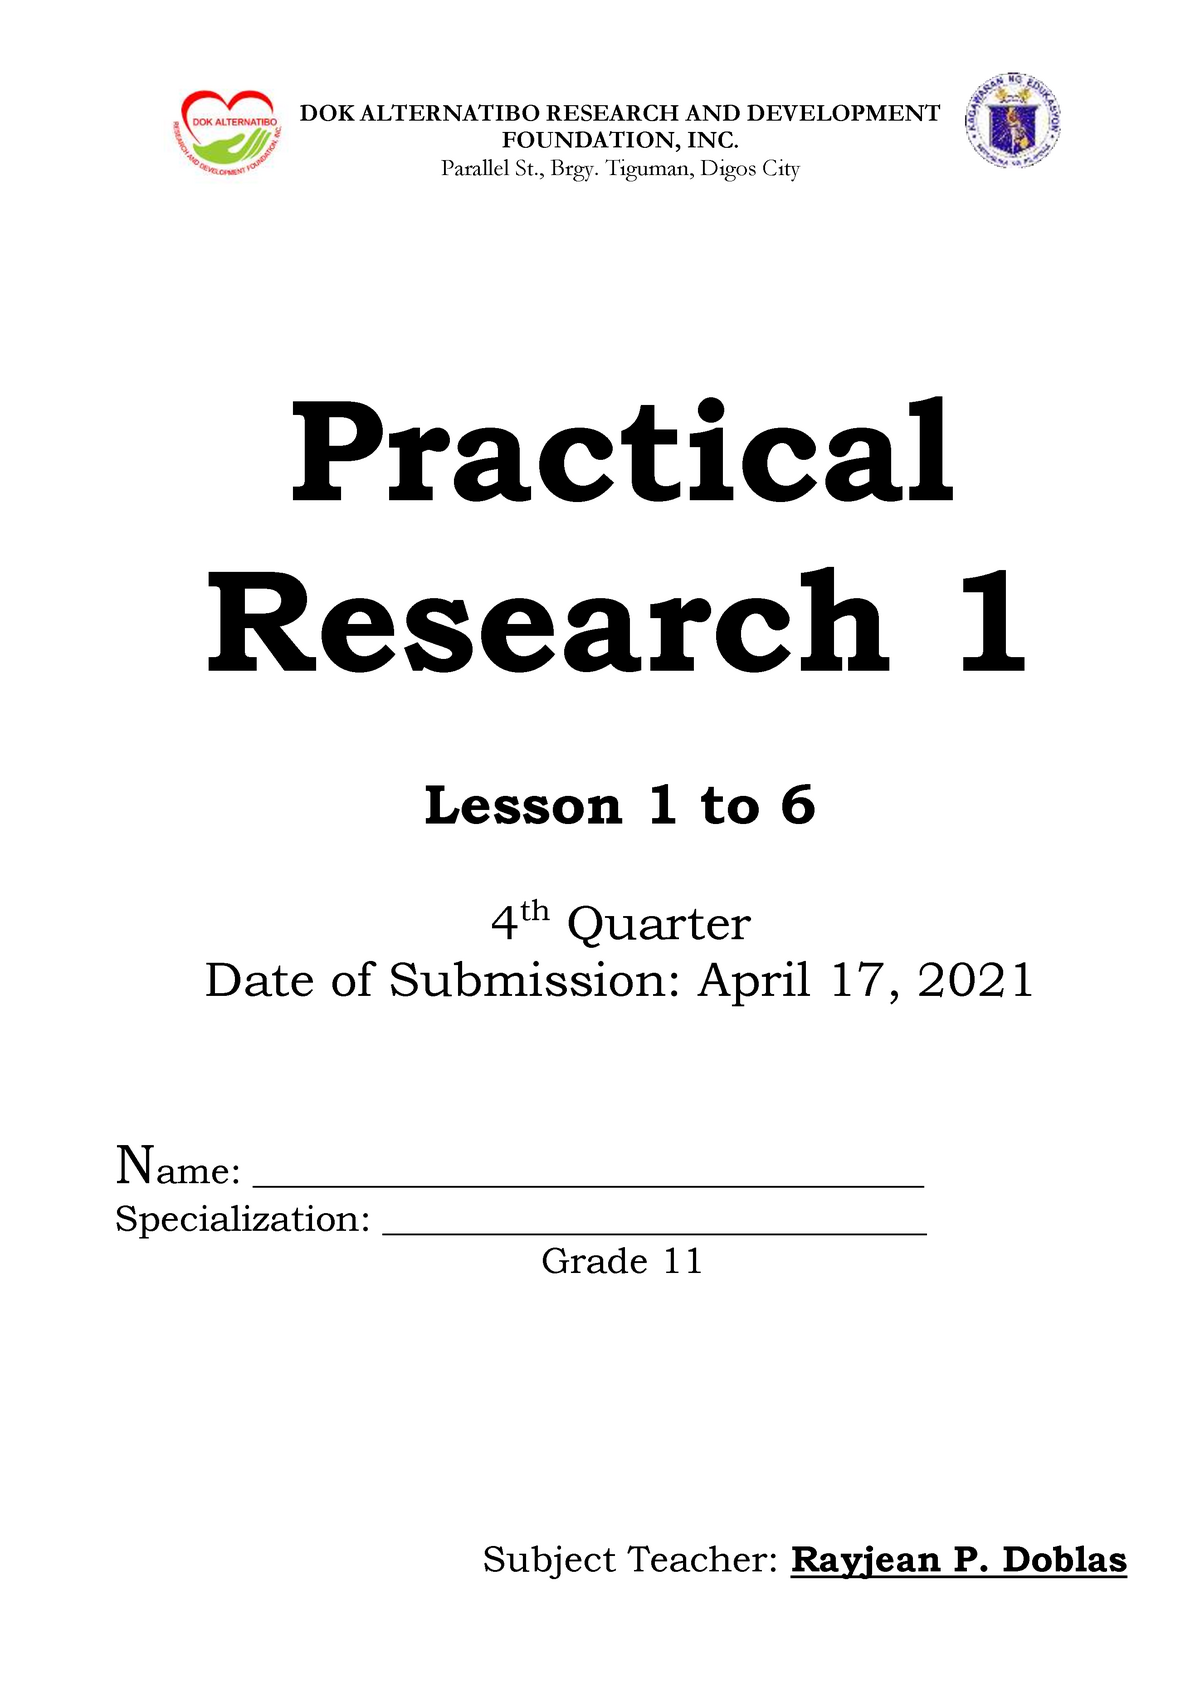 4as lesson plan in practical research 1